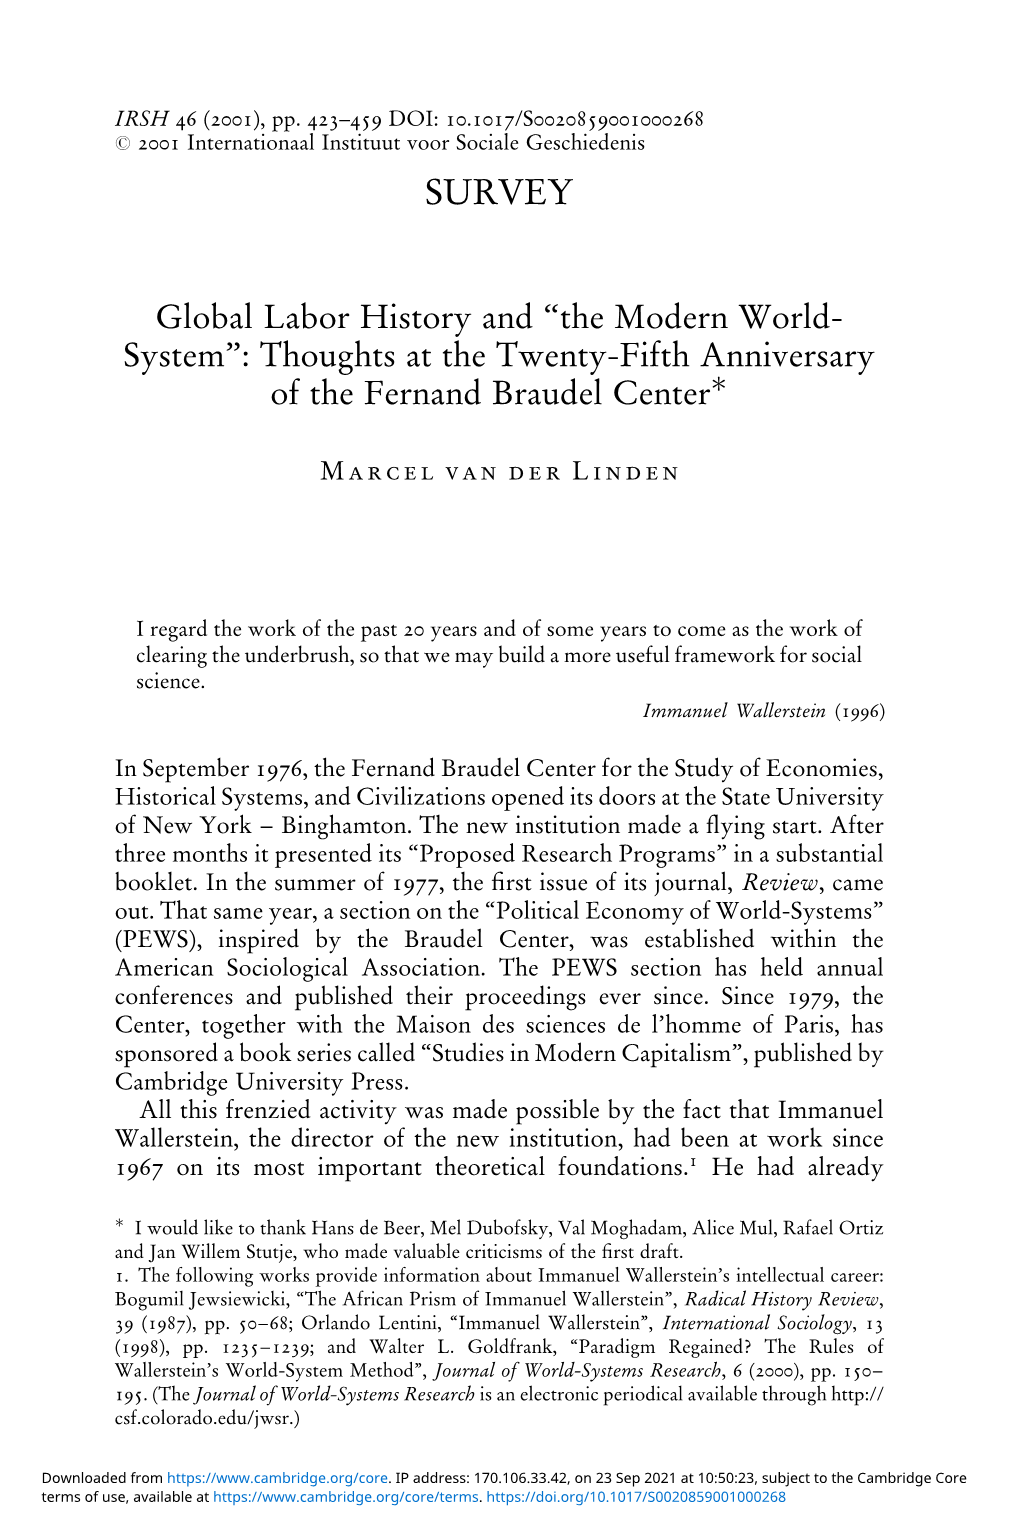 Global Labor History and &#8220;The